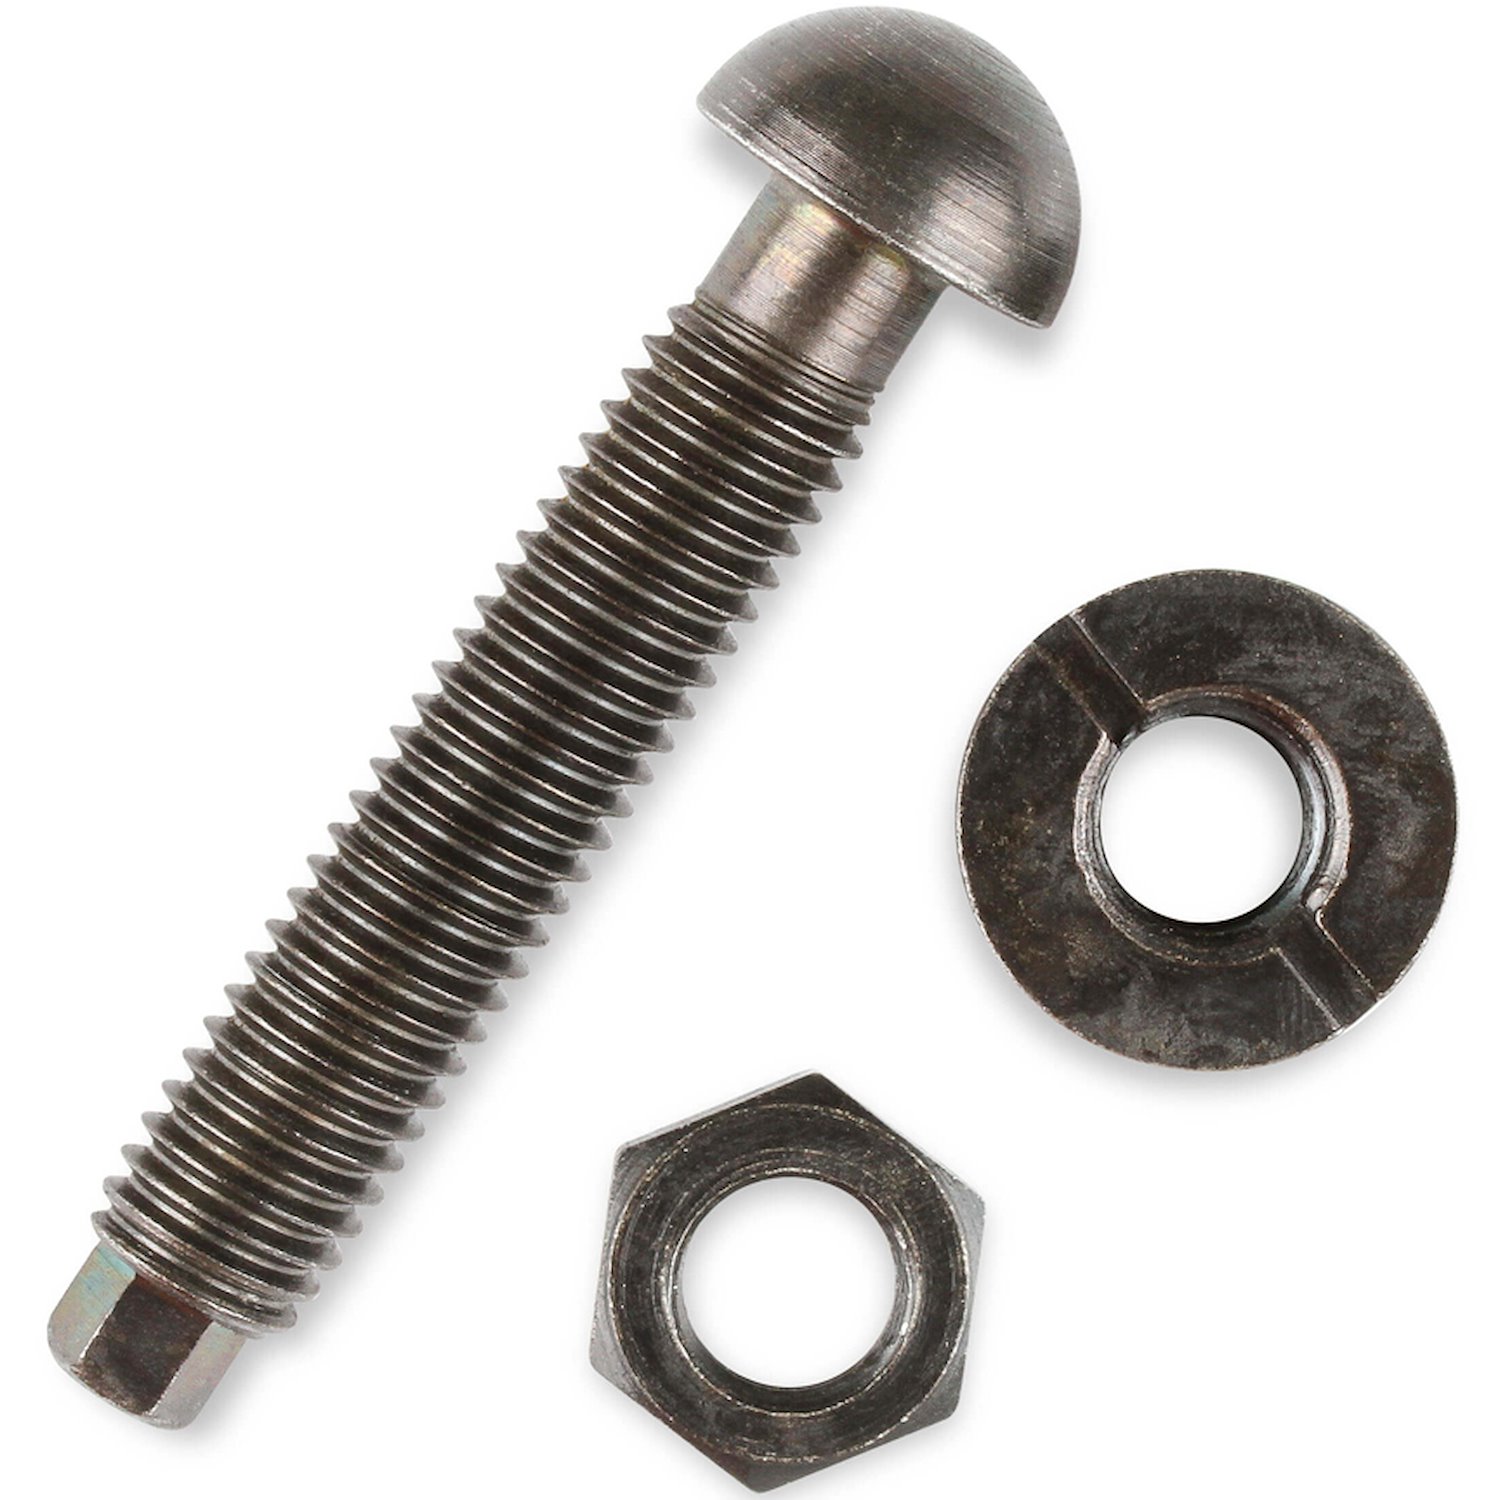 Adjustable Clutch Pivot Ball Stud for 1955-1983 Chevy/GM